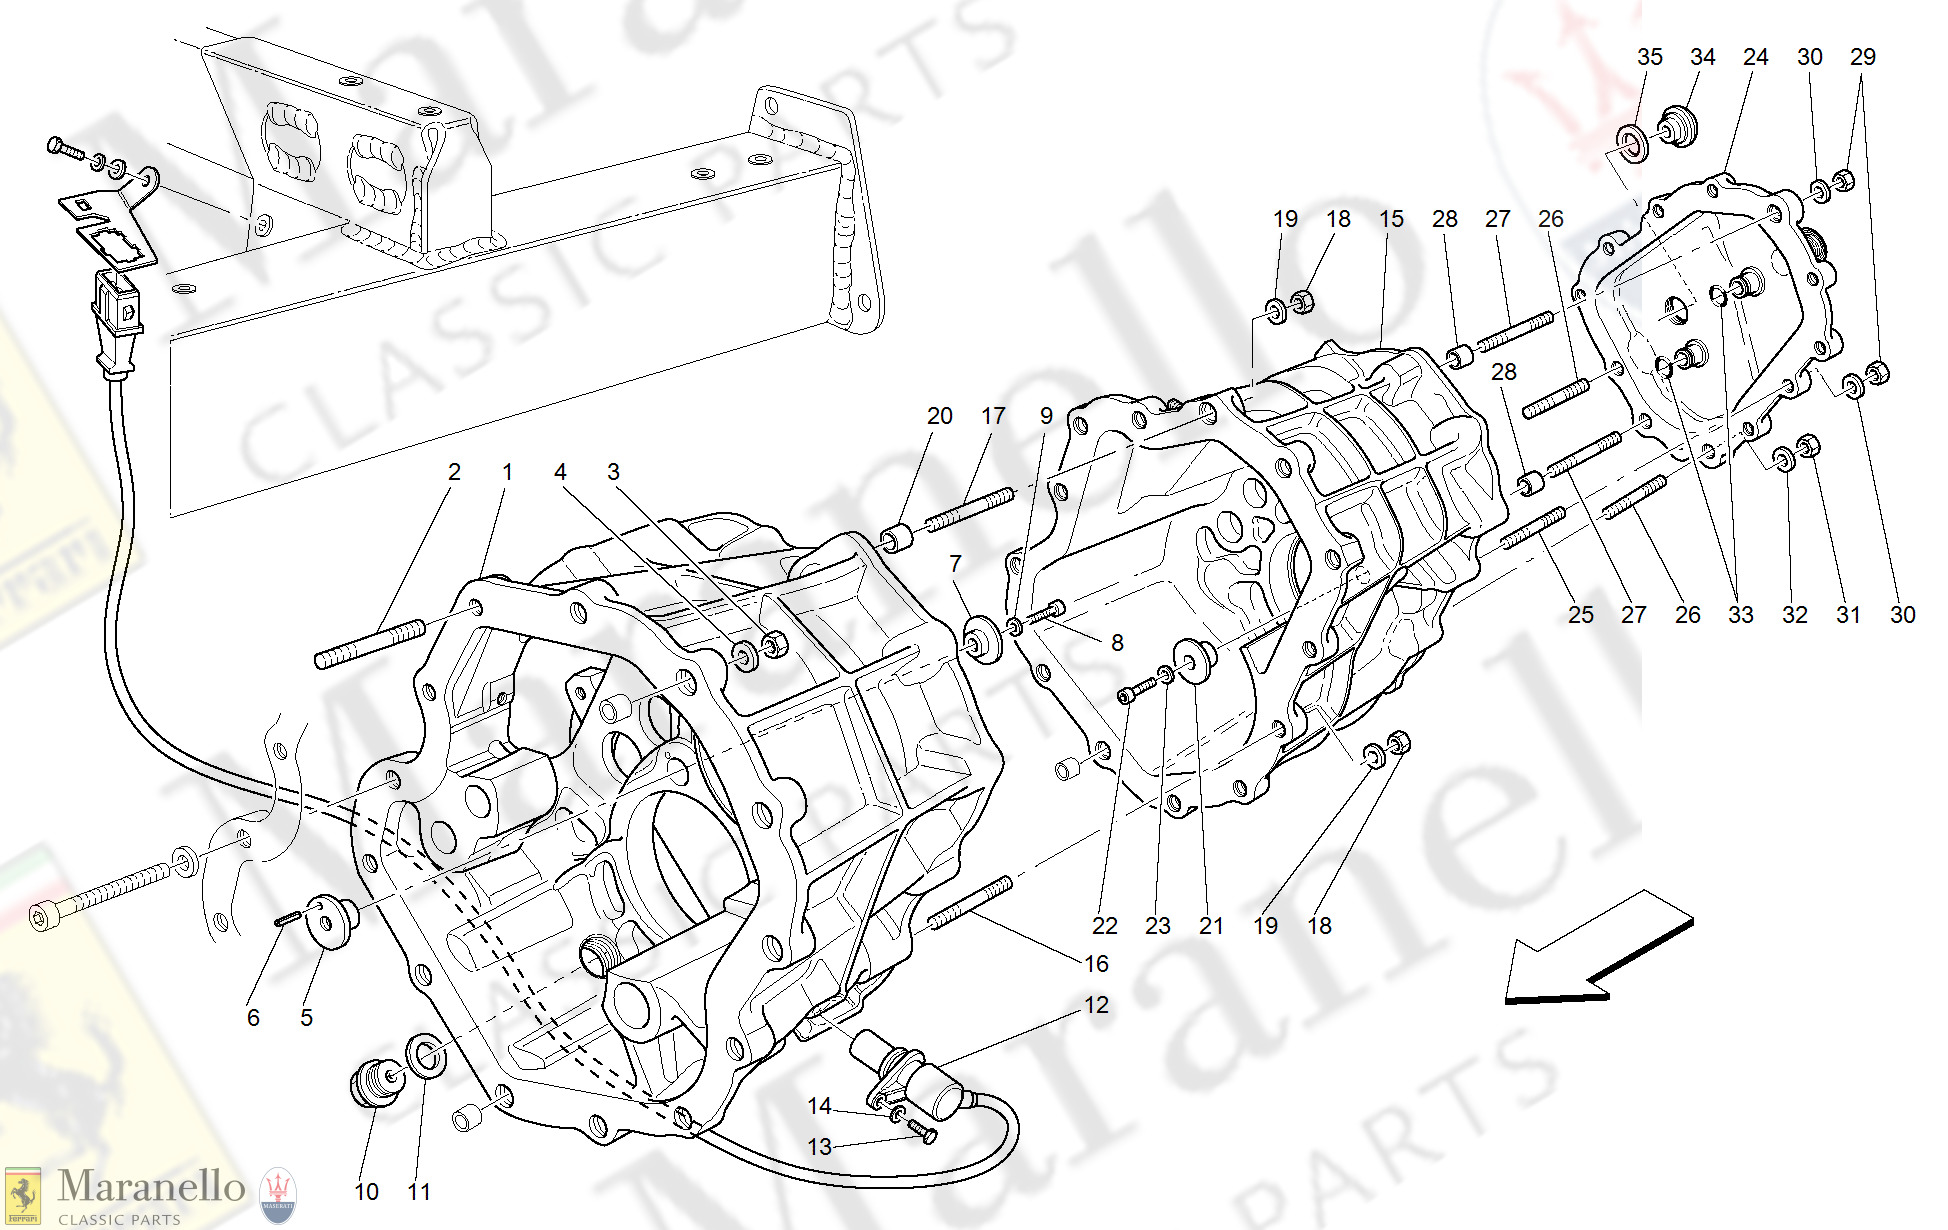 025 - Gearbox - Rear Part Gearboxes Housing And Cover